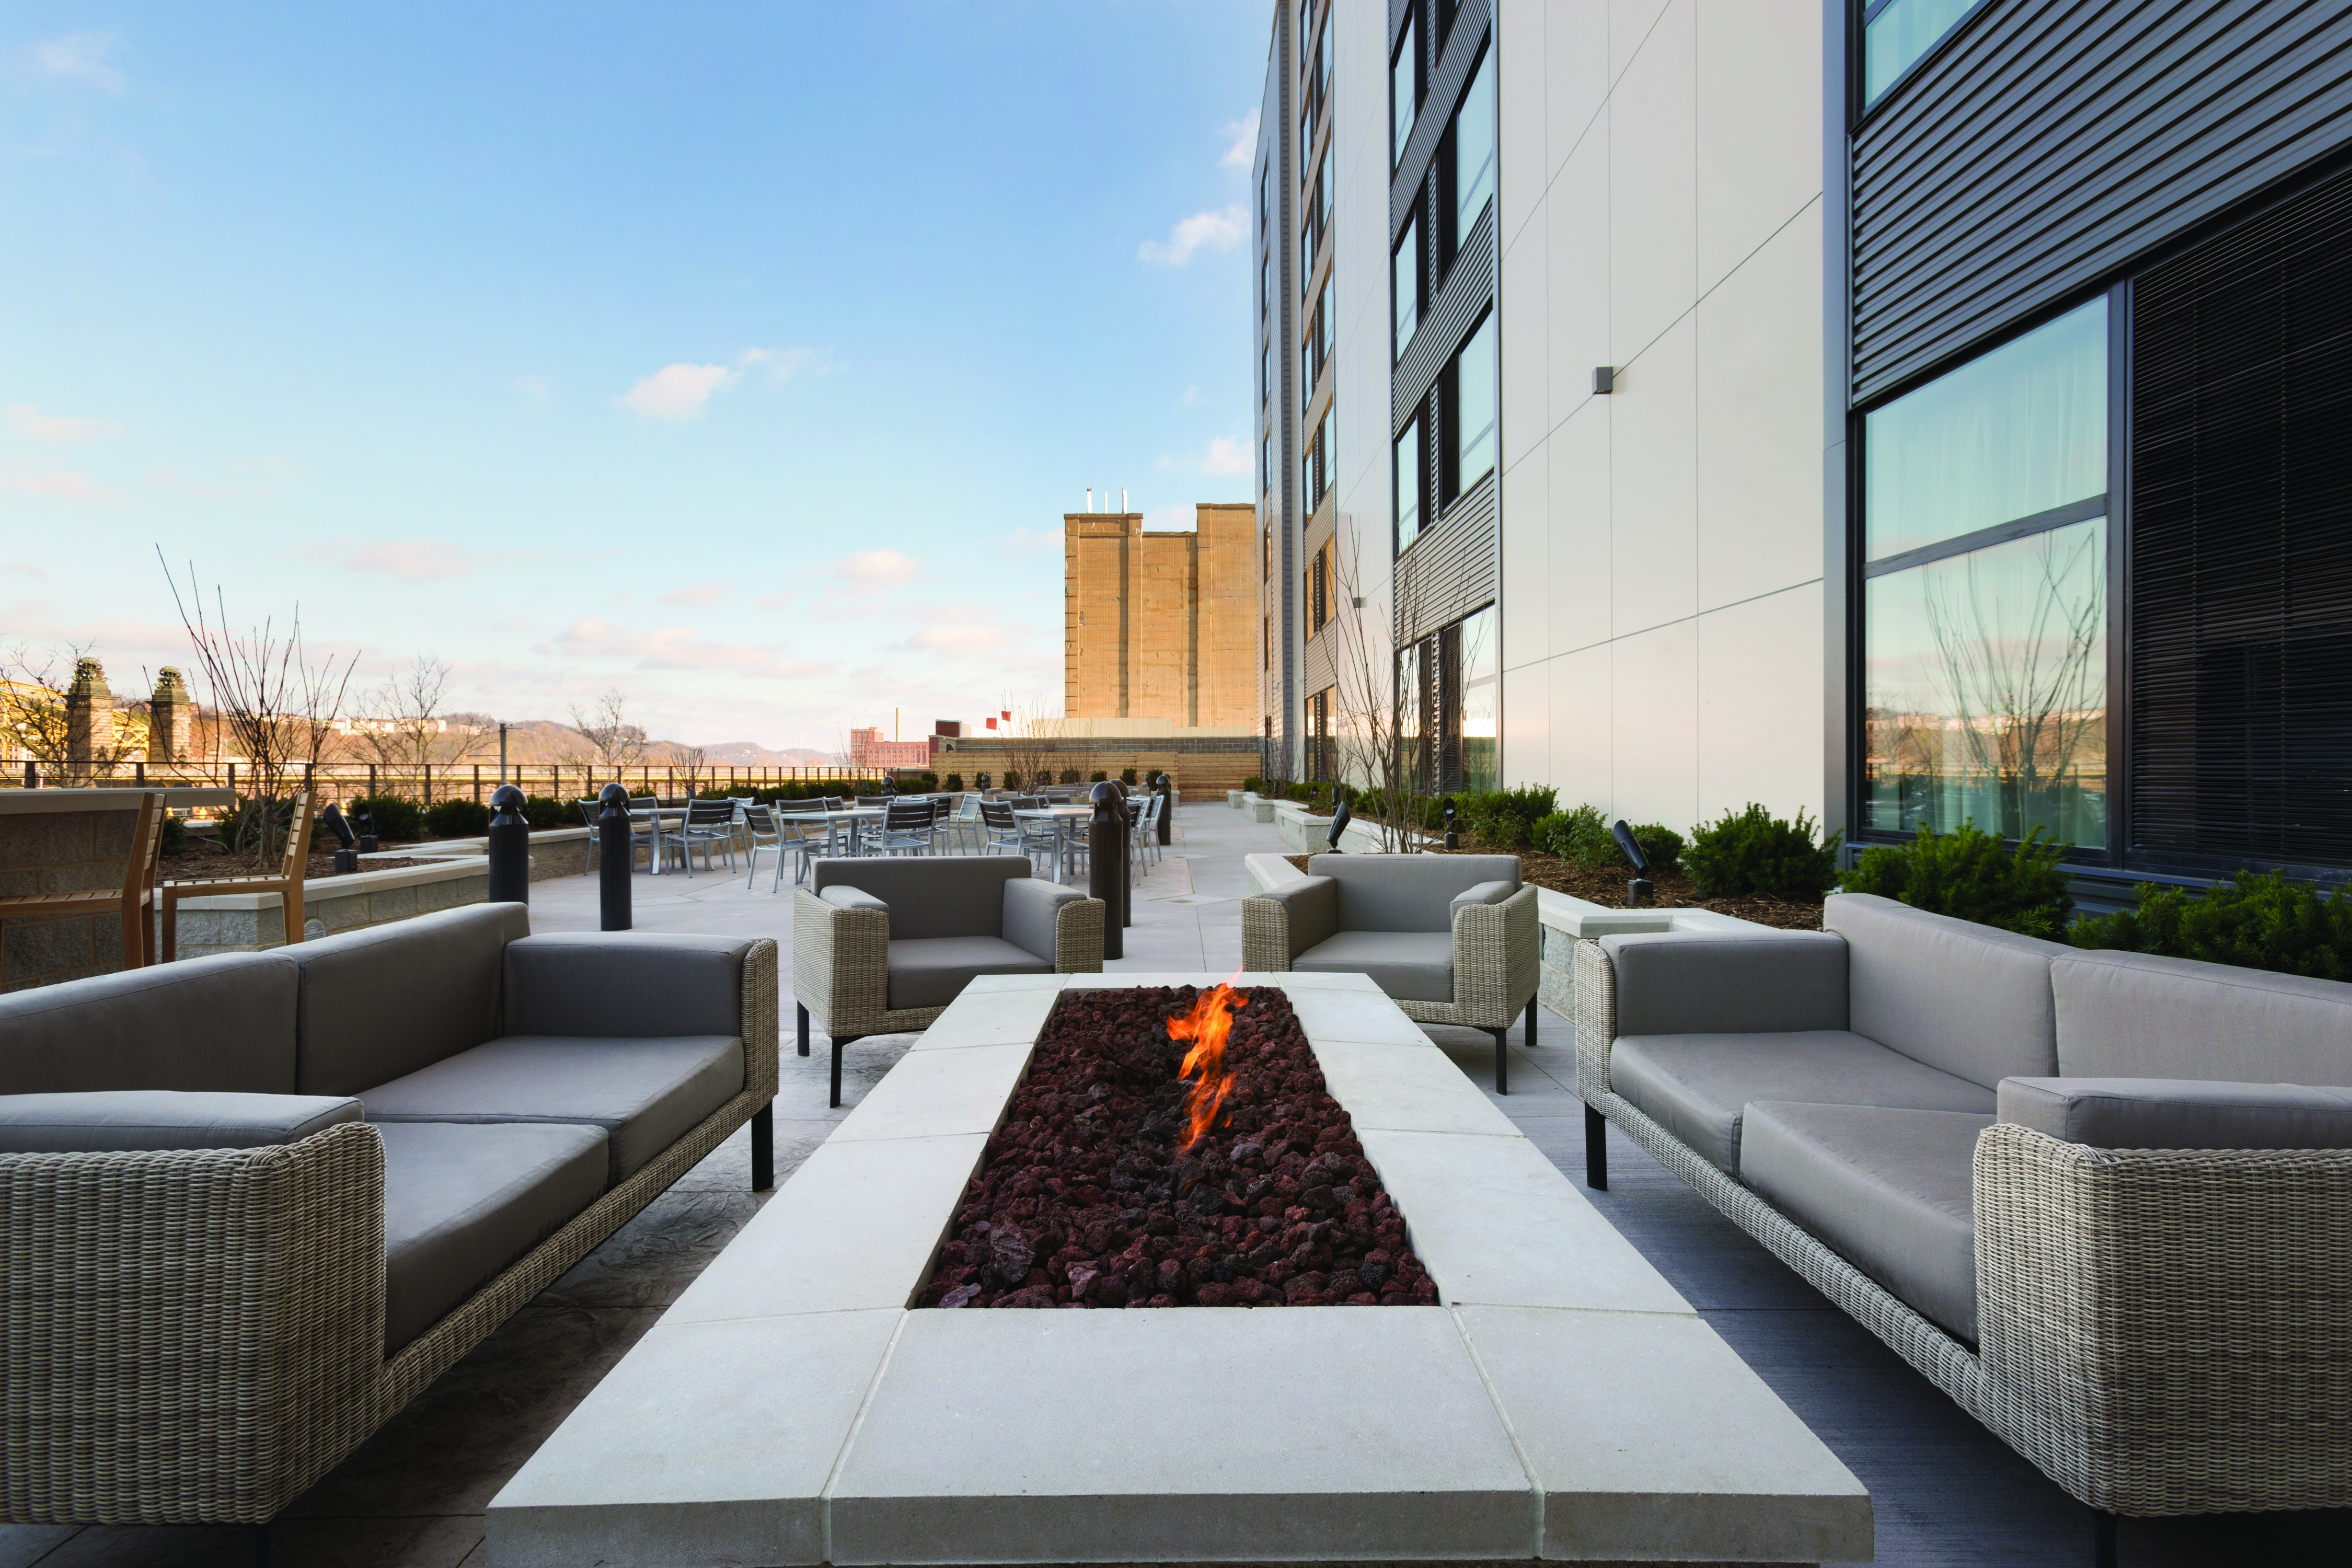 Outdoor Seating area with lounge sofas and chairs surrounding fire pit